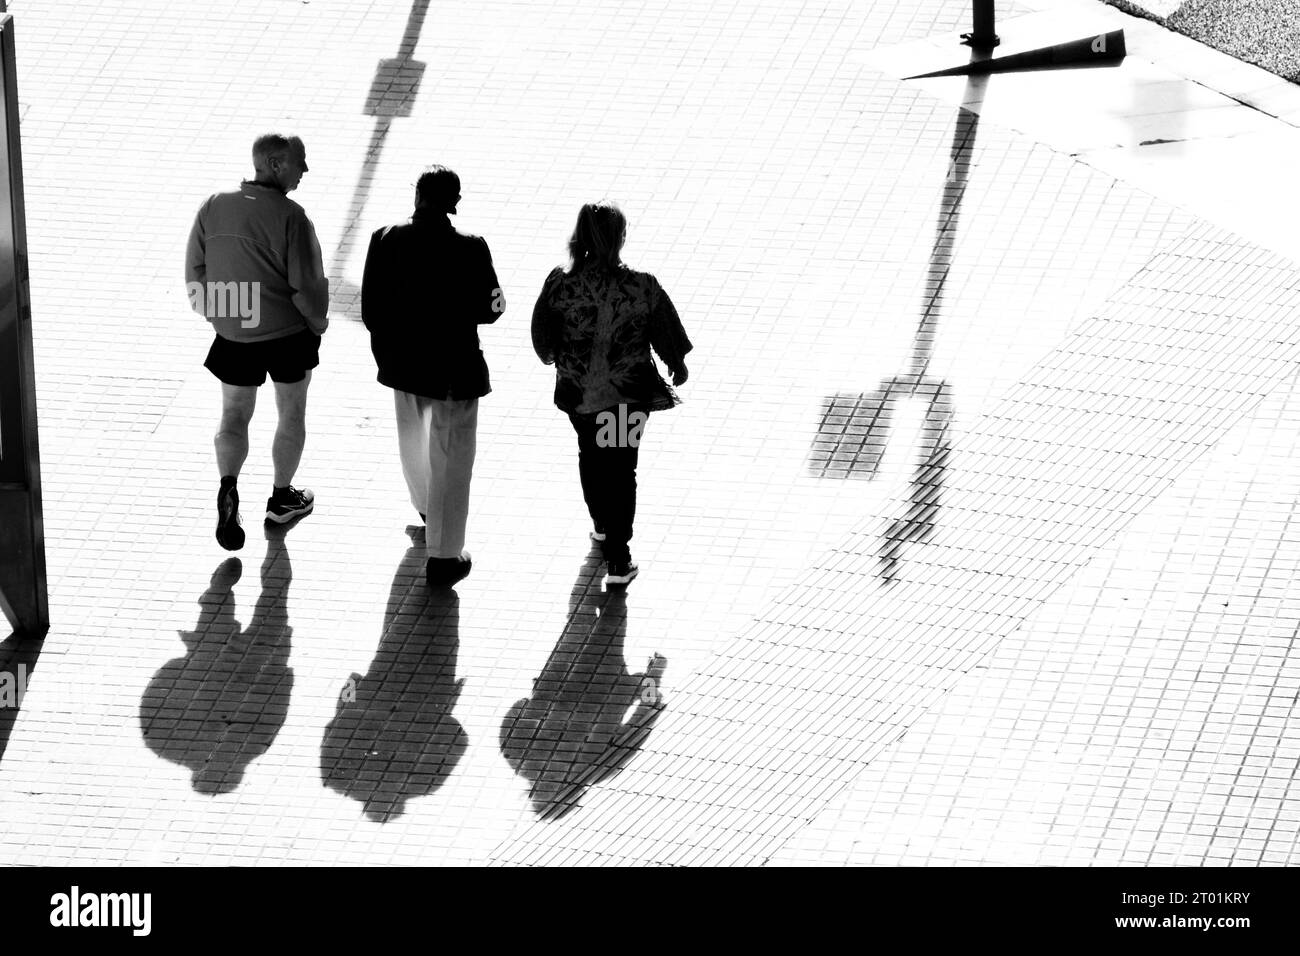 Three people walking down the street. The strong light highlights their silhouettes and their shadows drawn on the floor. Stock Photo